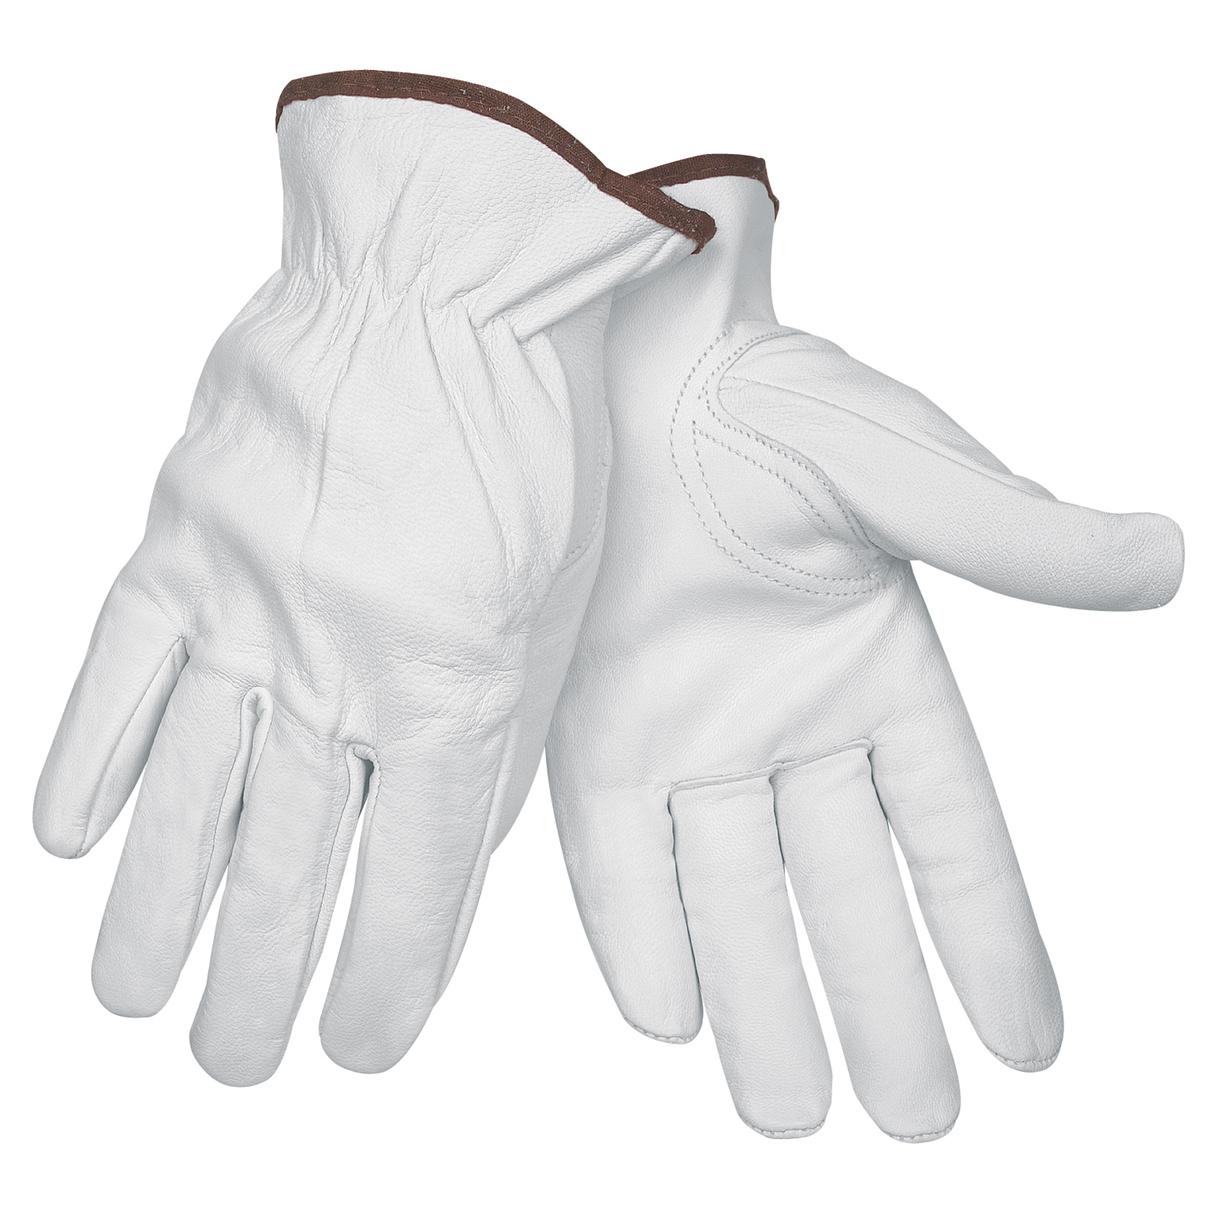 3601K - Goatskin Leather Drivers Work Gloves Kevlar and Synthetic